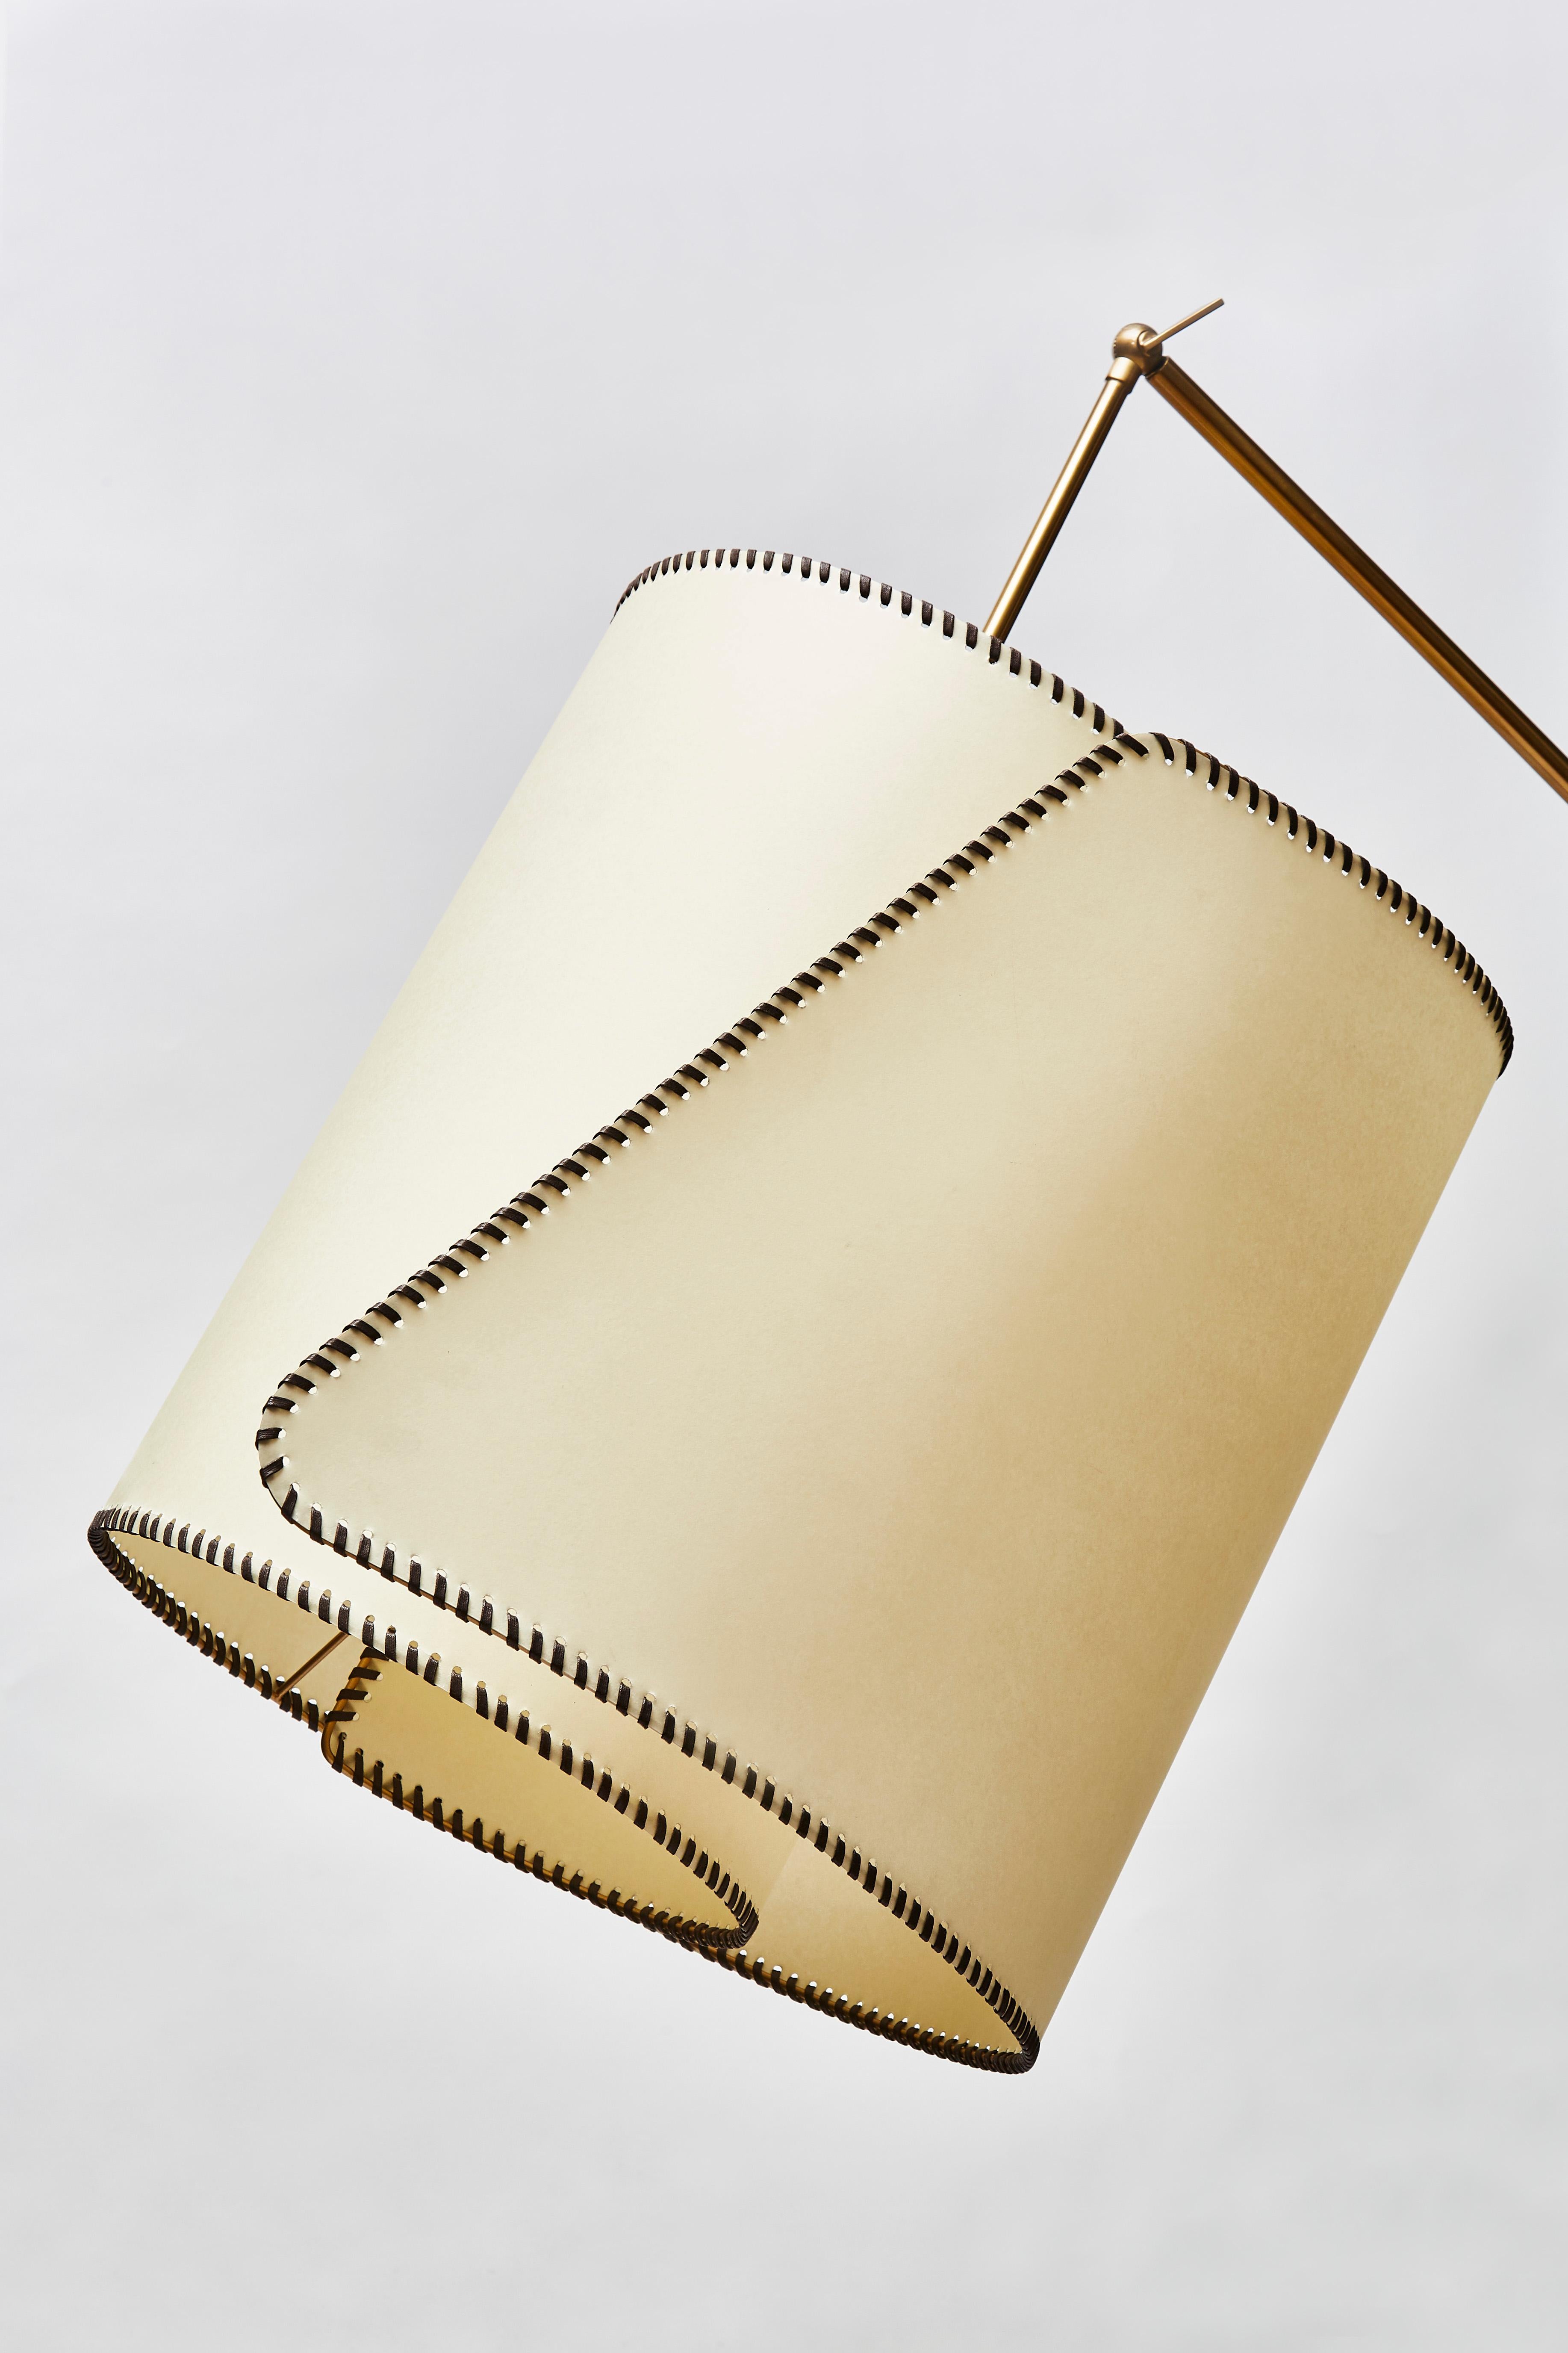 Italian Parchment, Brass and Marble Floor Lamp by Diego Mardegan for Glustin Luminaires